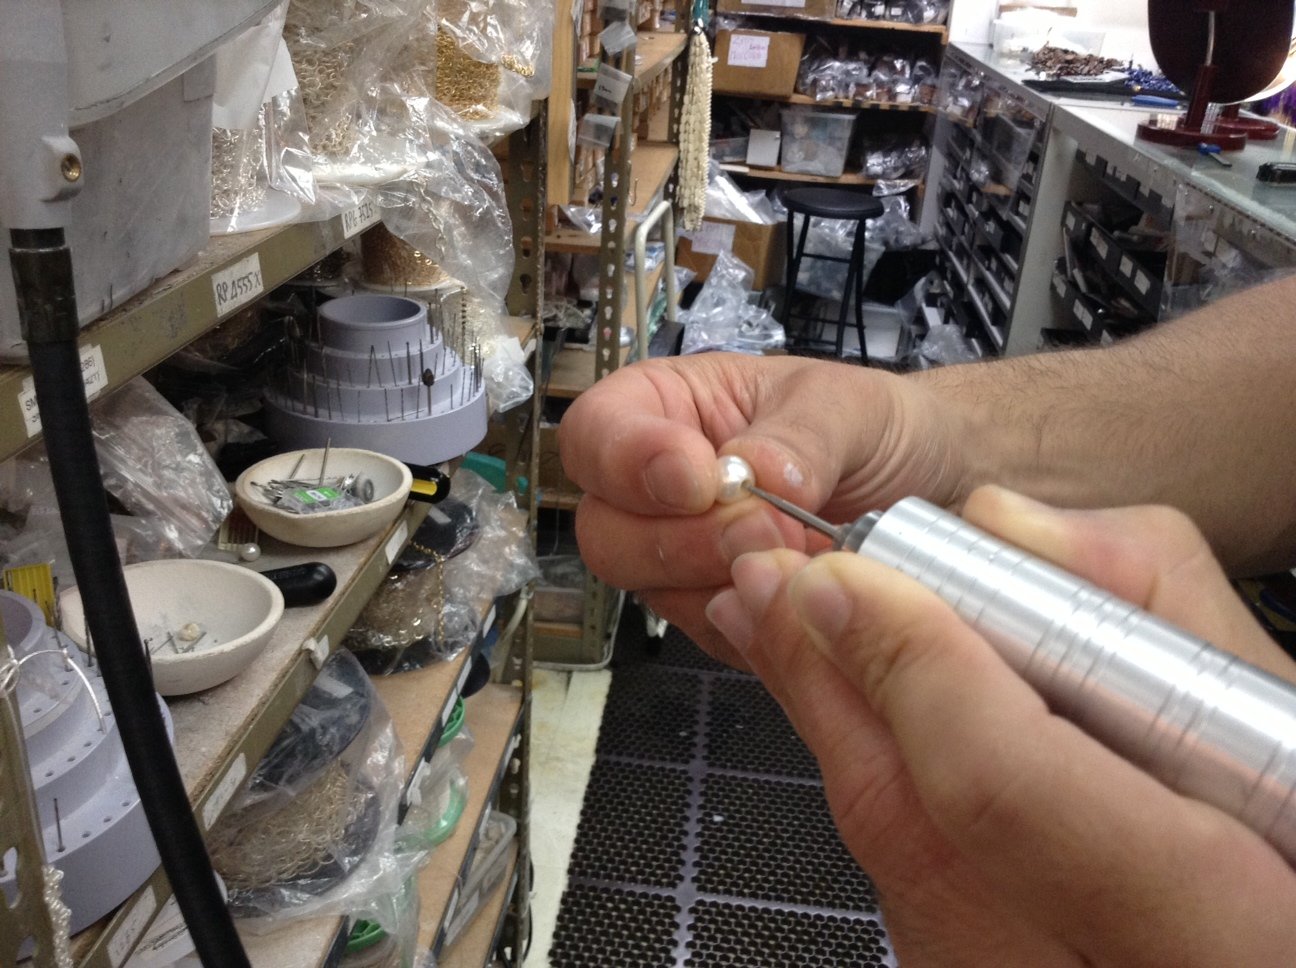 Step 4: Use a Hand Drill to Clean out any Residual Glue in the Bead